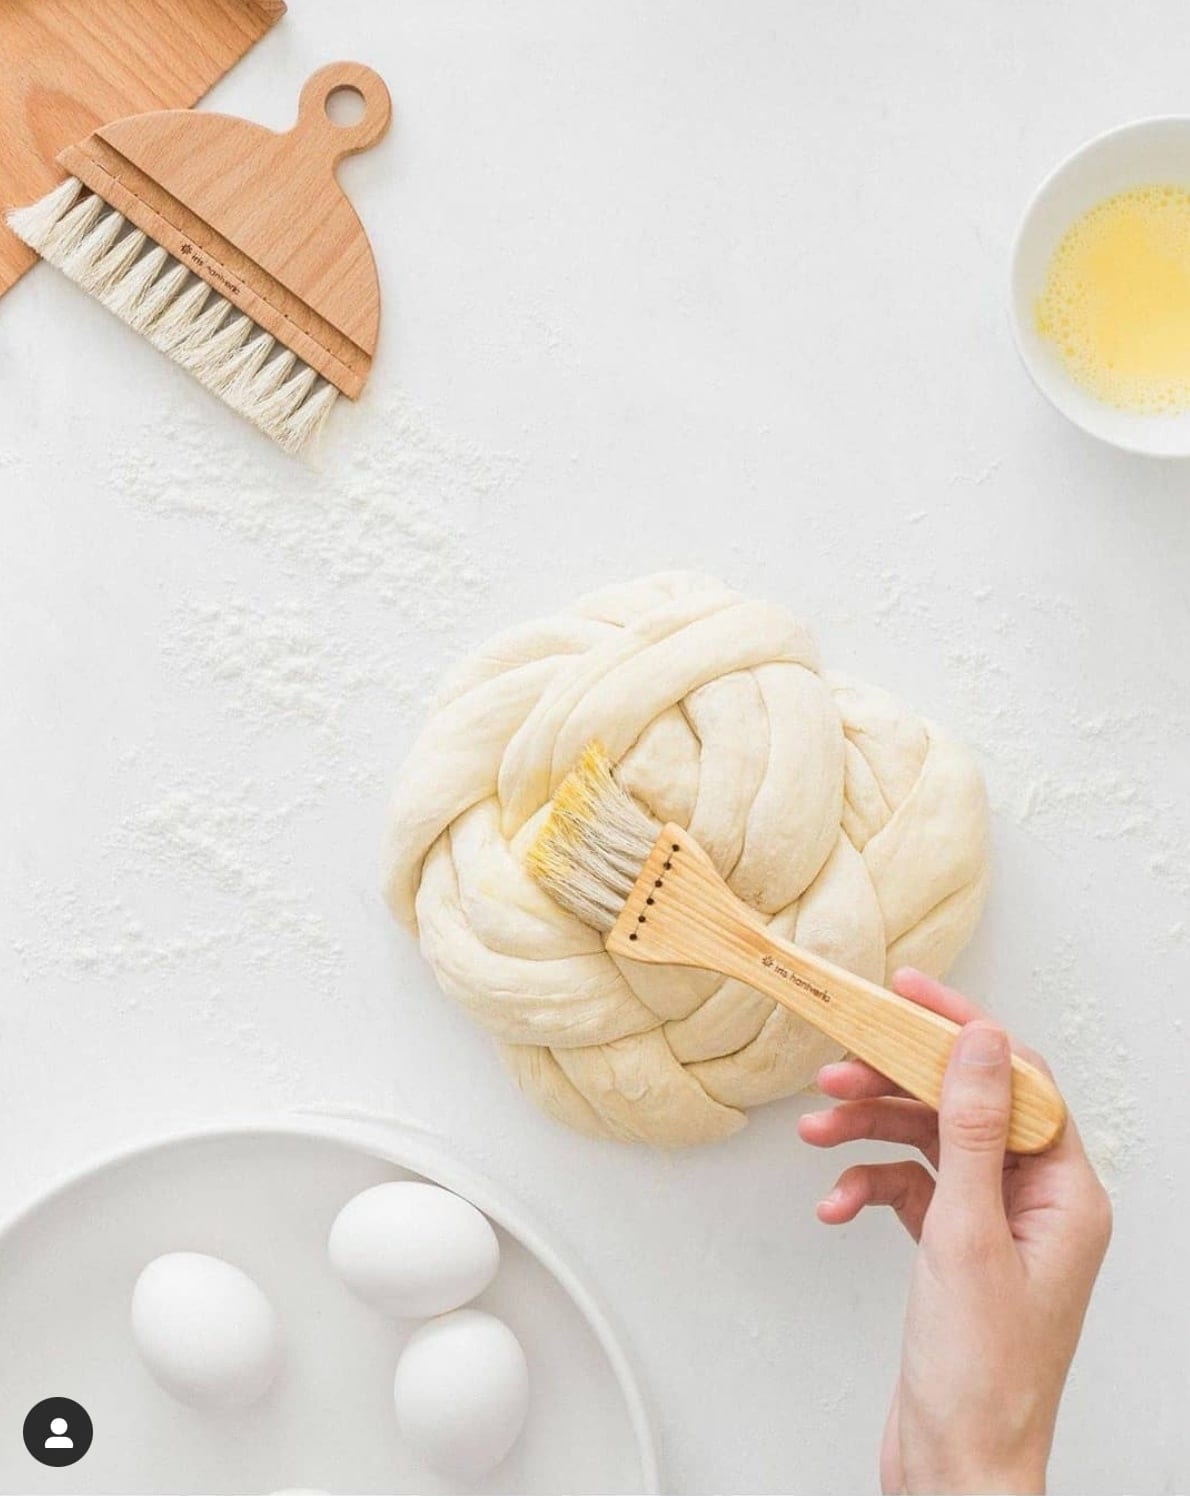 A person is using a Pastry Brush – Waxed Birch &amp; Horsehair from Iris Hantverk to knead dough.